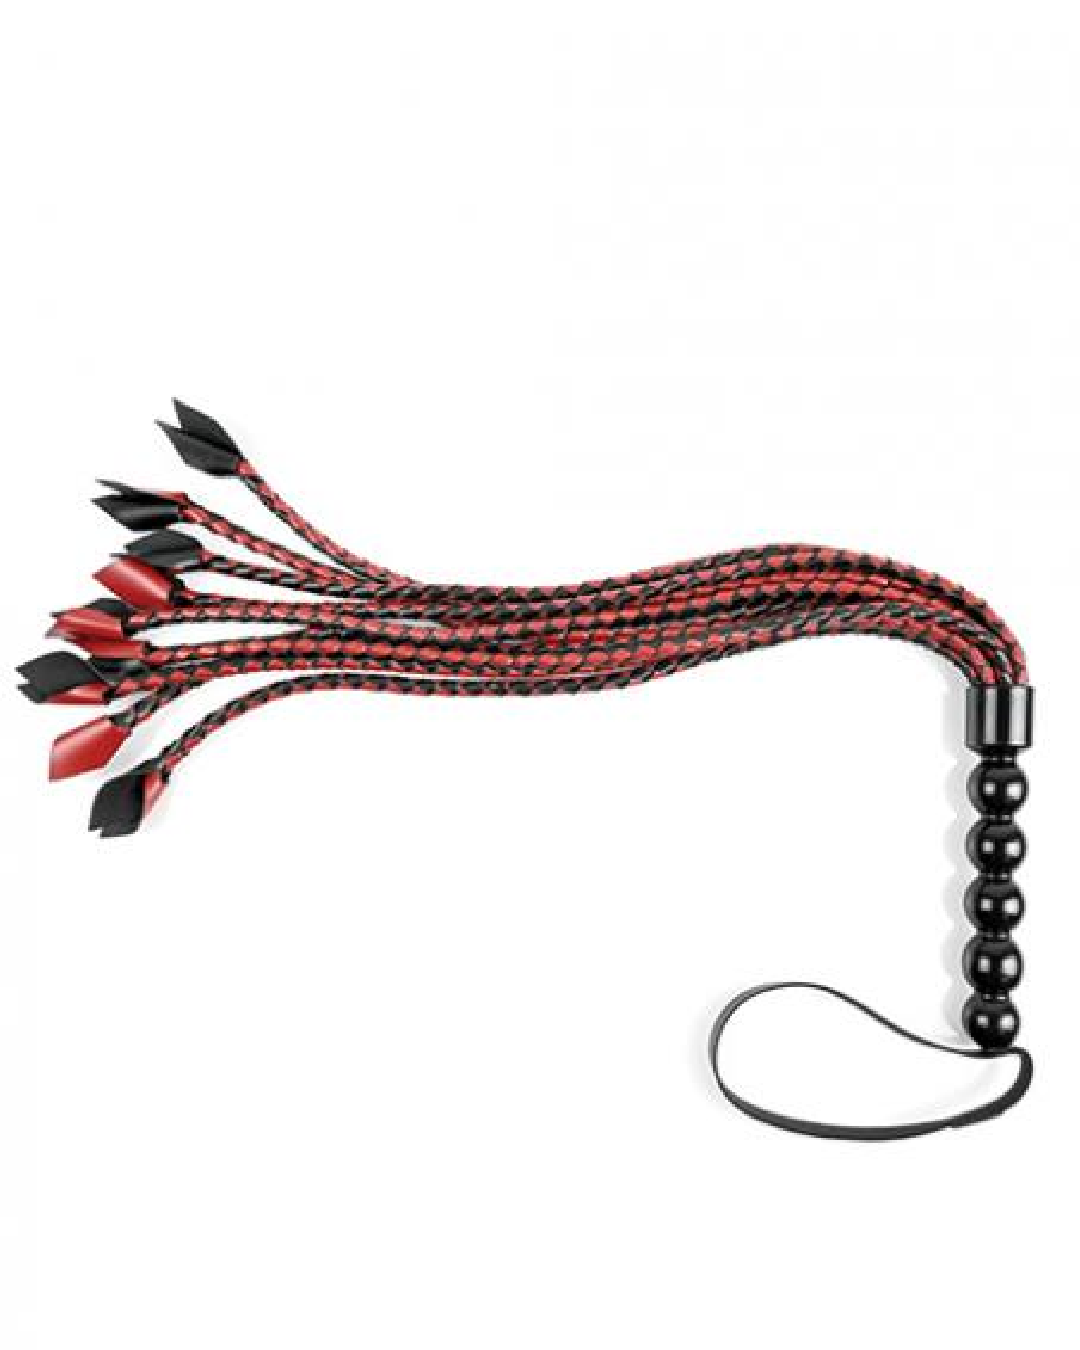 Saffron Braided Flogger by Sportsheets  fanned out to the left with handle upright on white background 